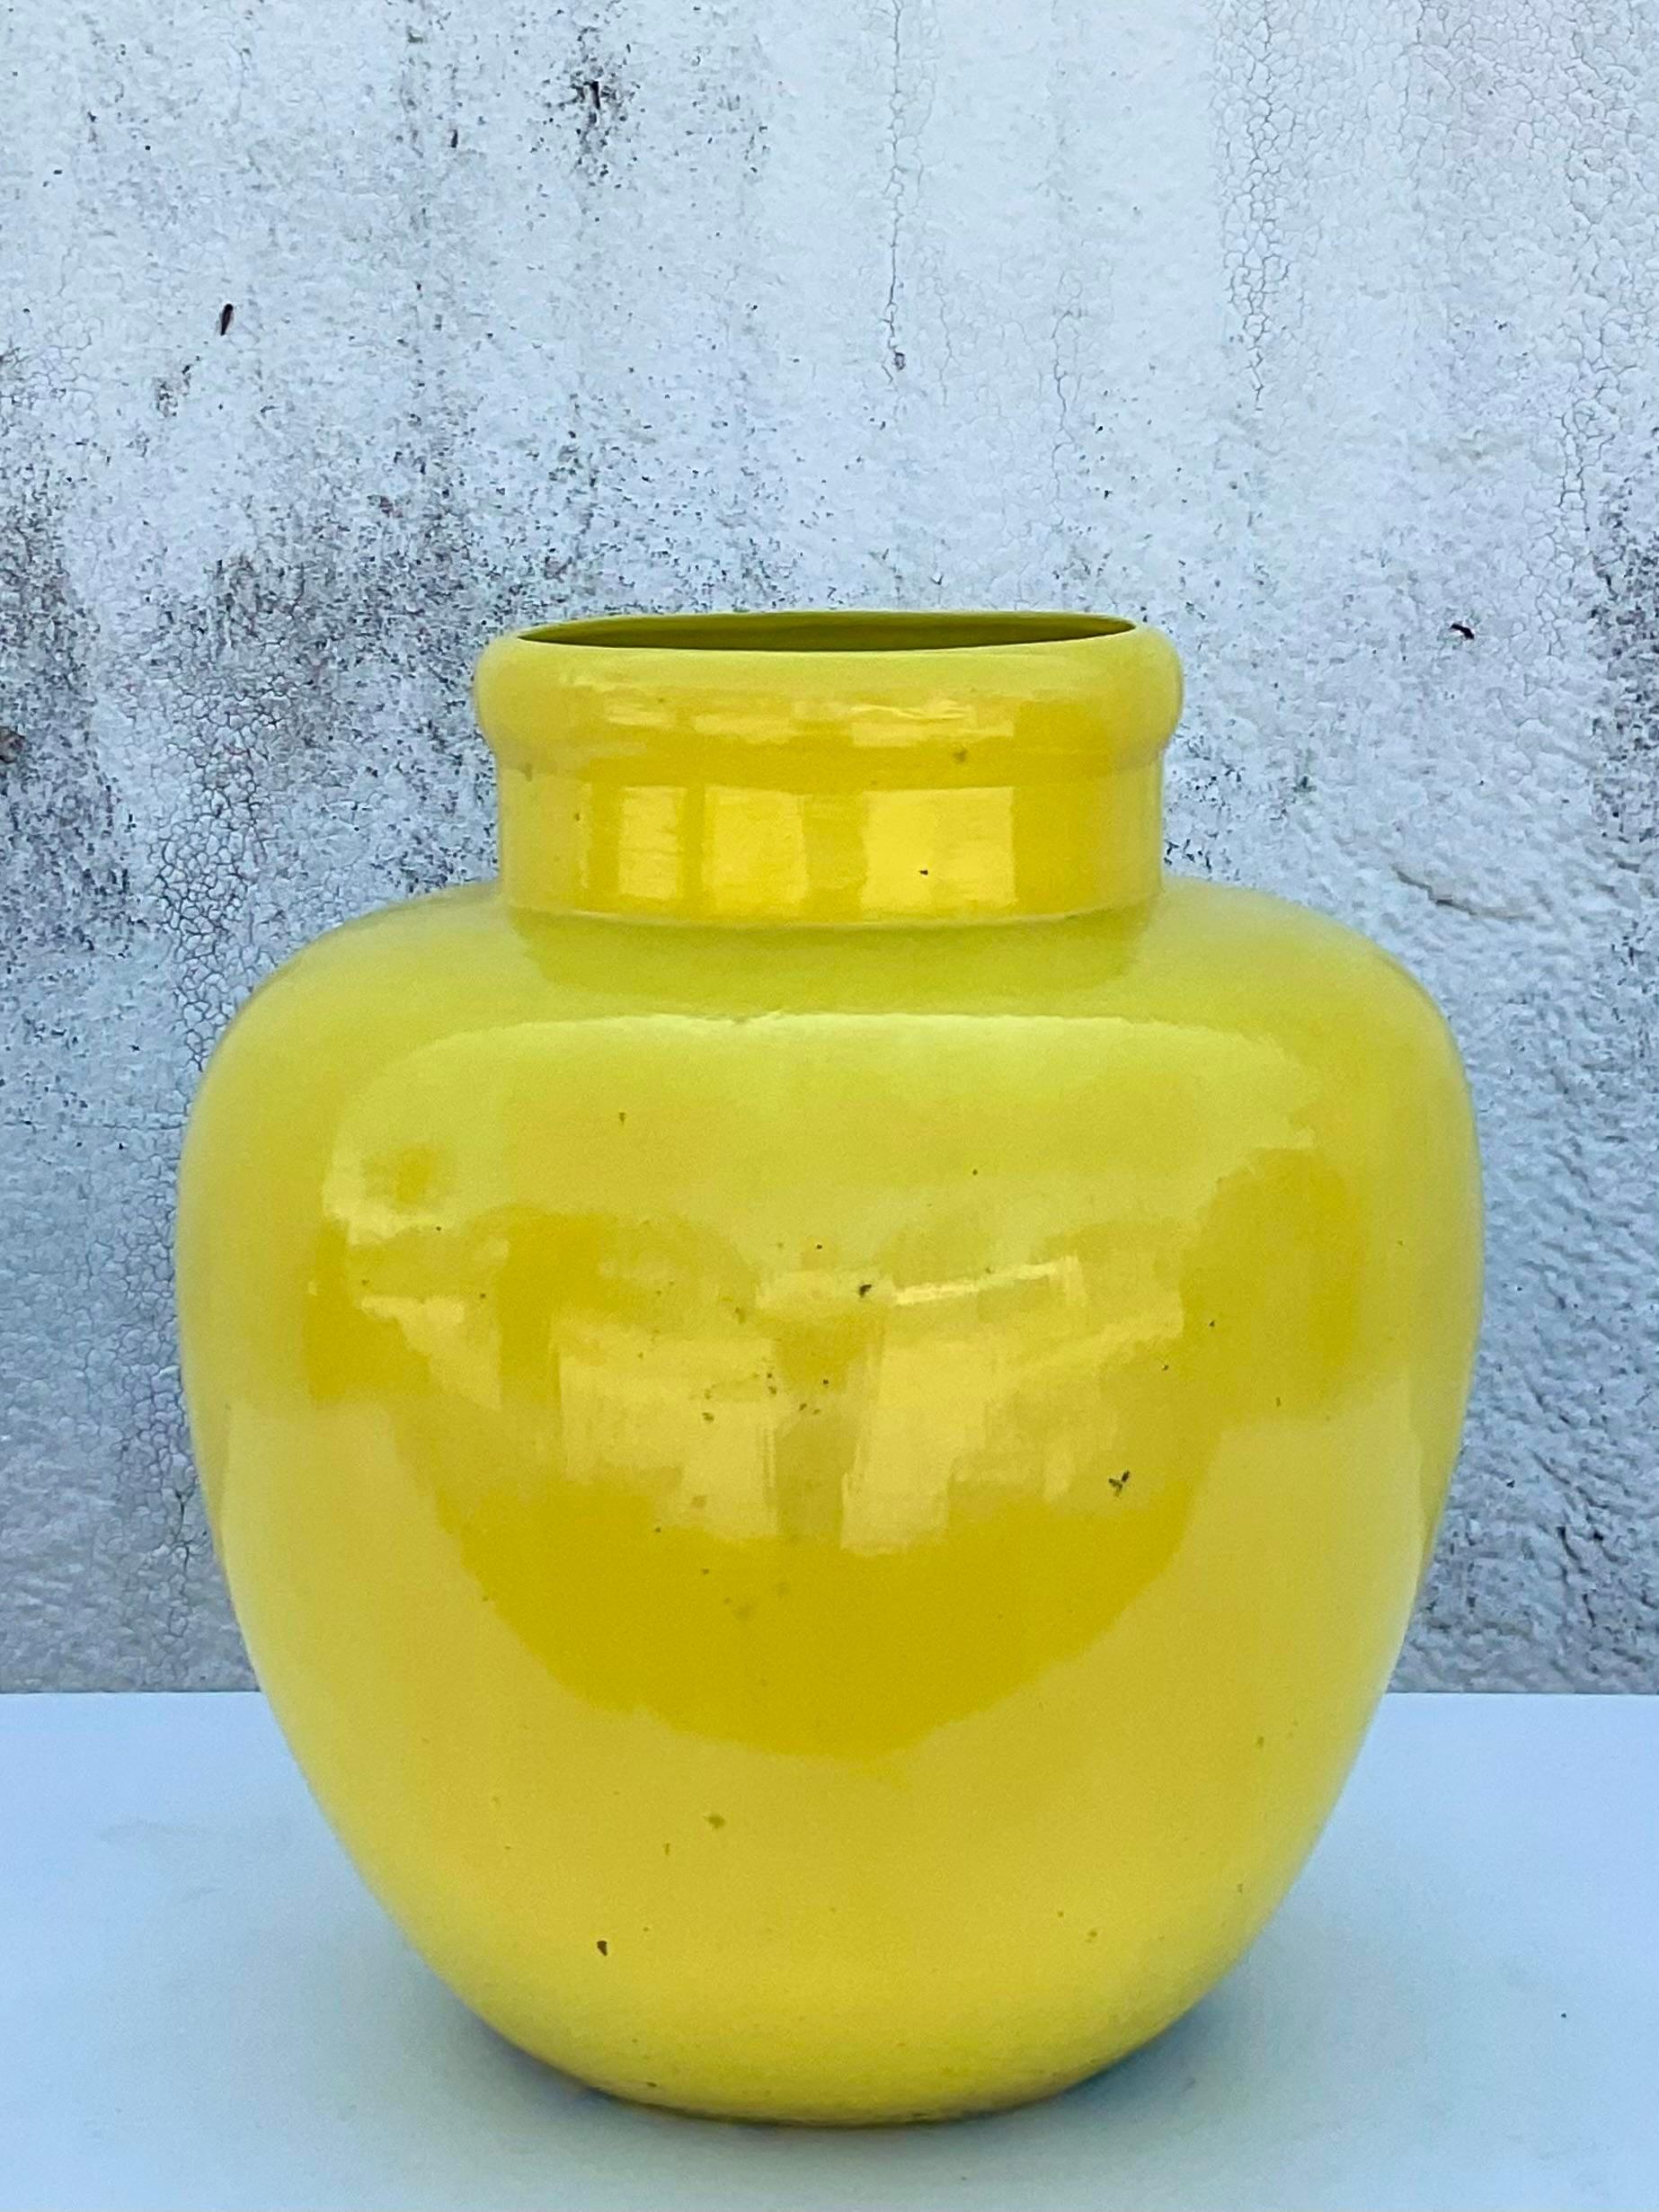 Fantastic vintage glazed pottery urn. Beautiful bright yellow in a gloss finish. Drilled for drainage. Add a little flash of color to any space. Part of a collection of urns that are also available on my Chairish page. Acquired from a Palm Beach